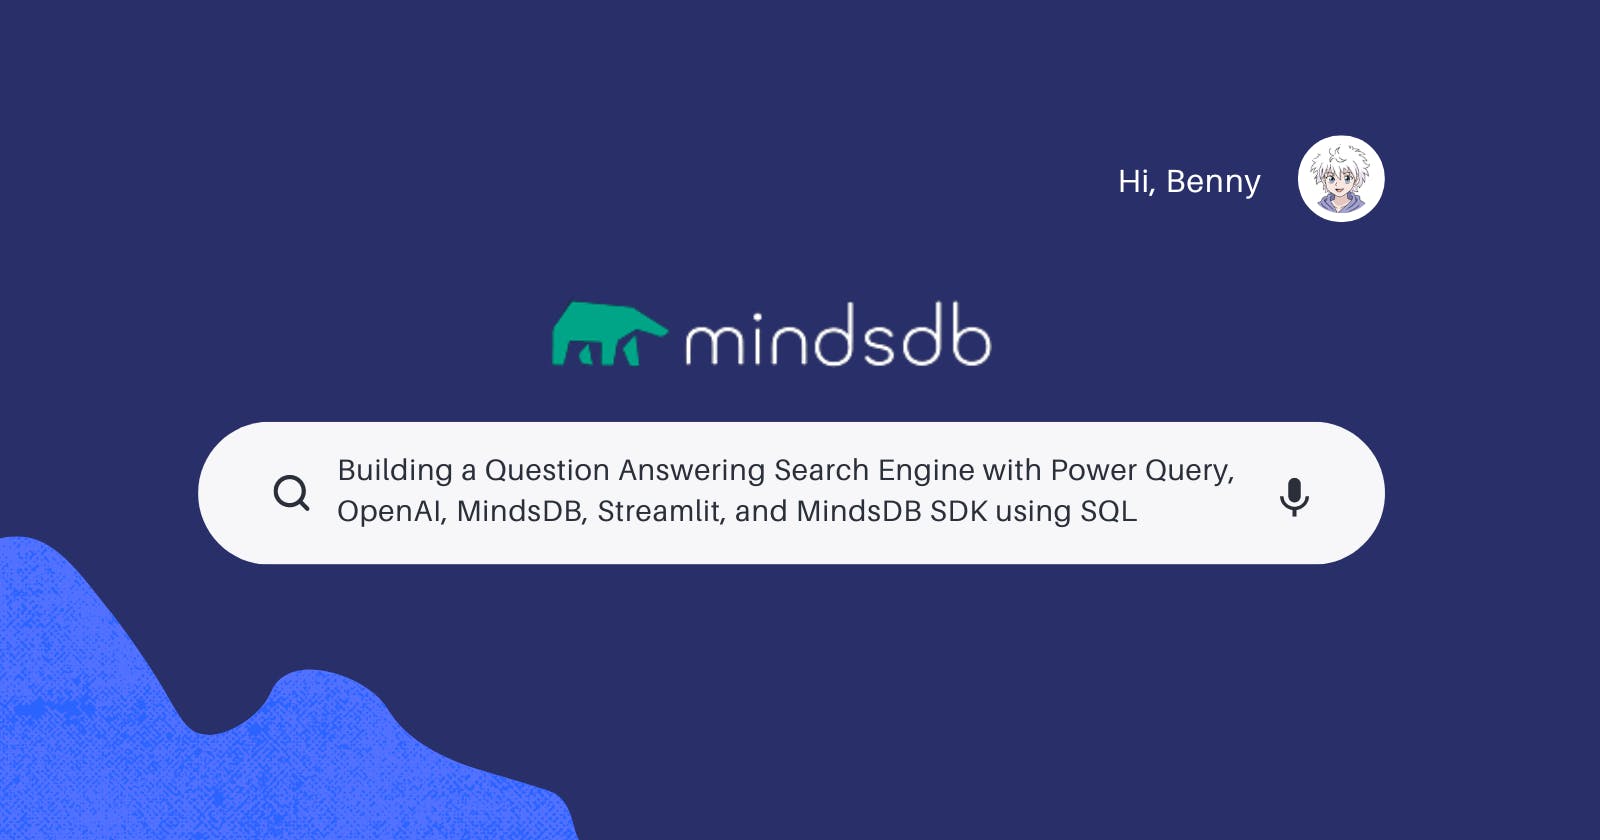 Building a Question Answering Search Engine with Power Query, OpenAI, MindsDB, Streamlit,and MindsDB SDK using SQL